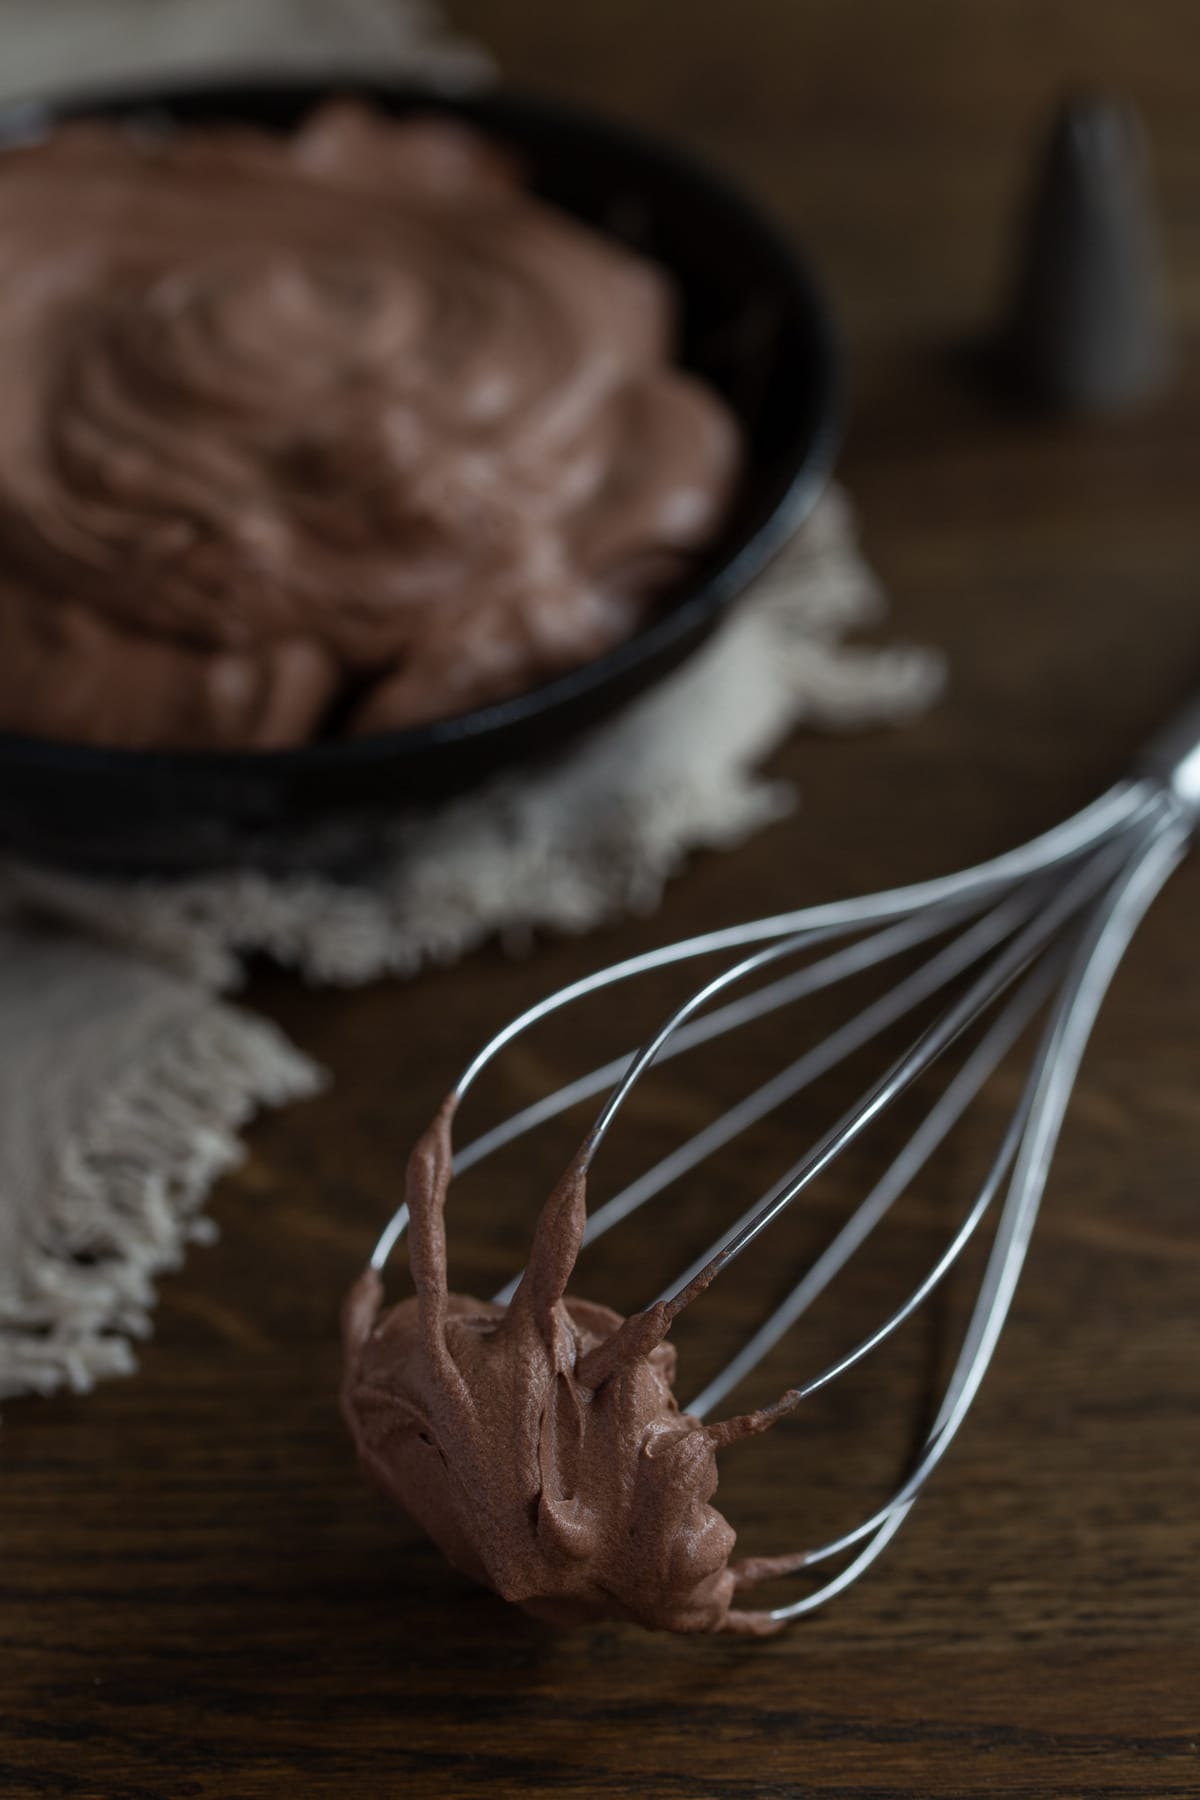 Hand whisk used to whip cocoa cream.